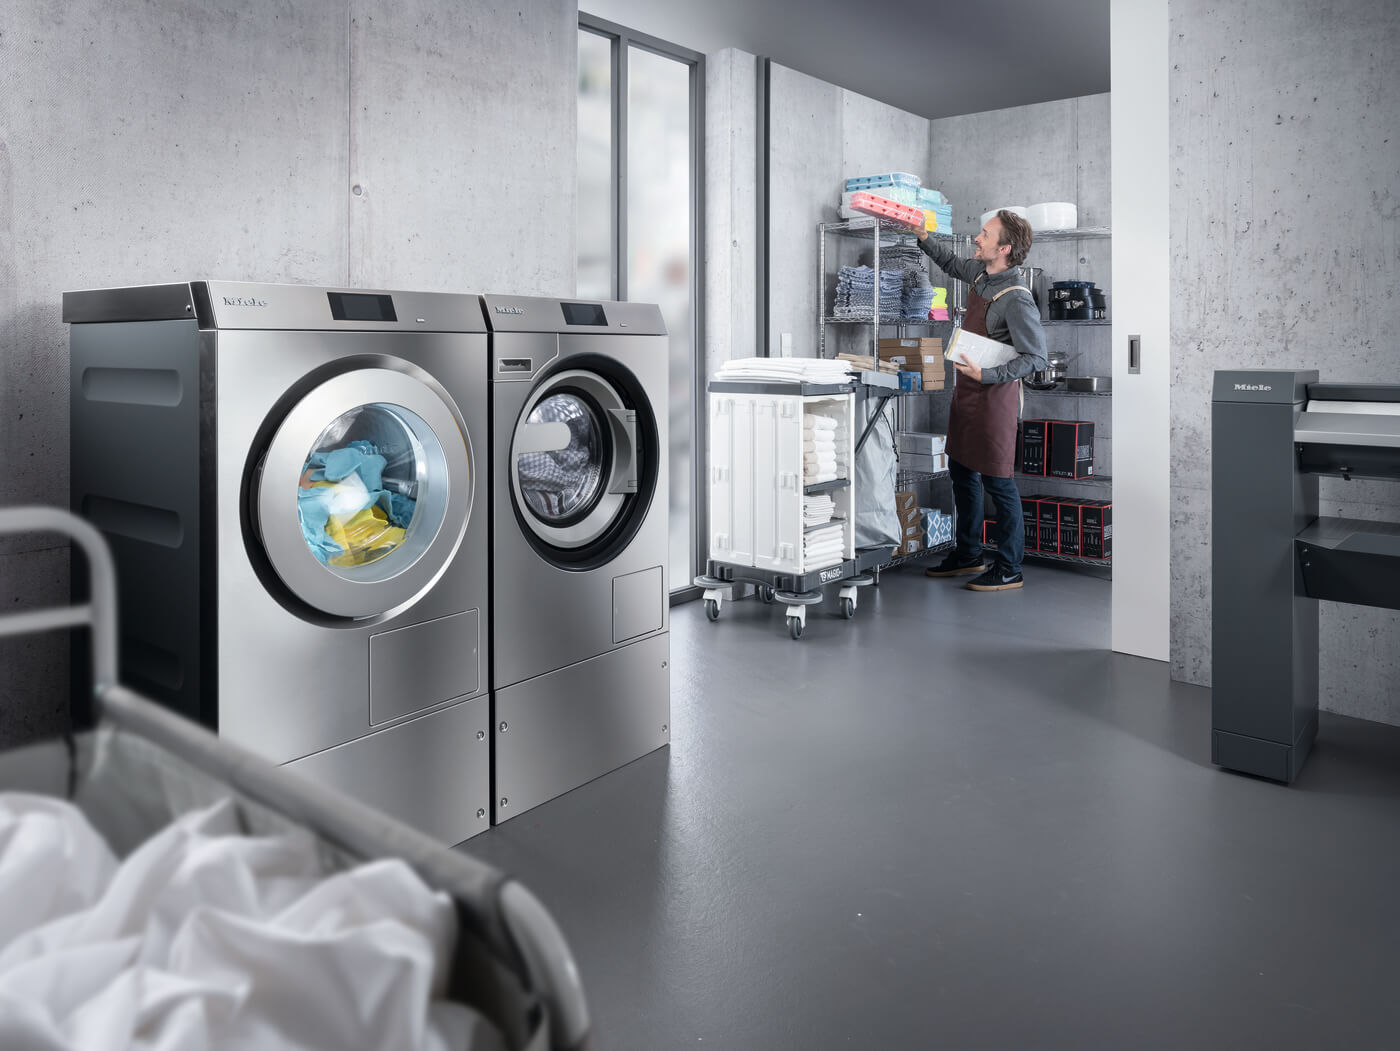 Have you considered an on-premises laundry in your hotel?